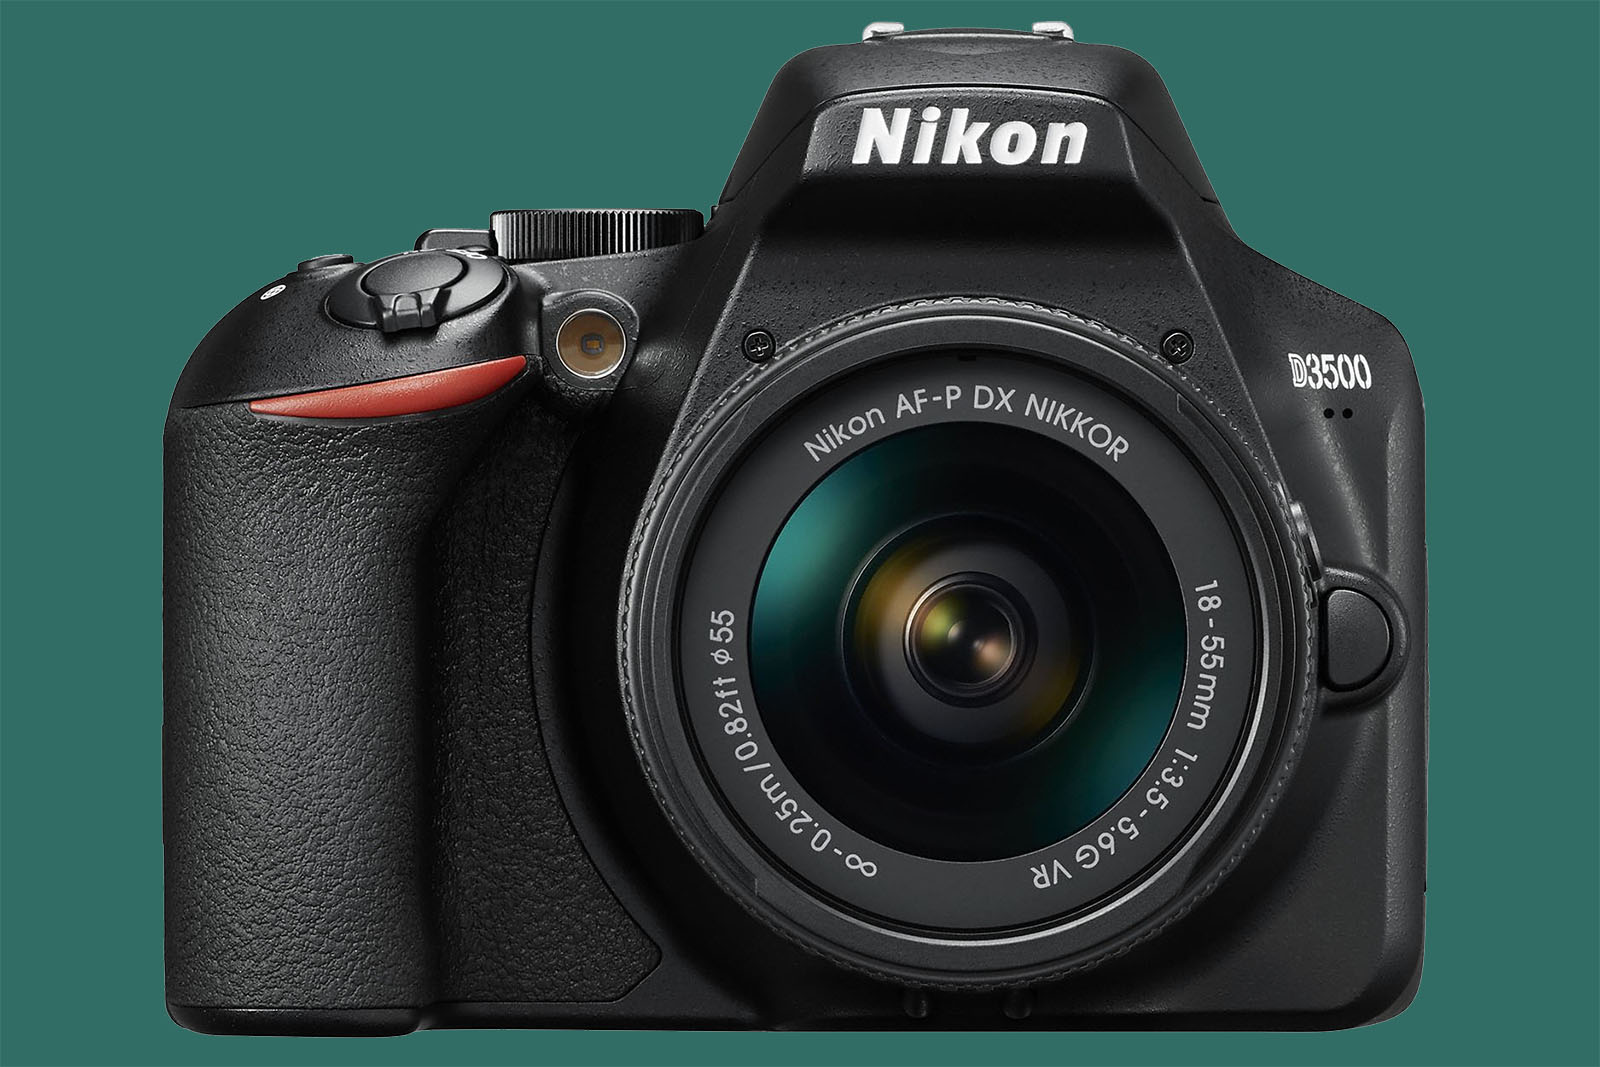 Nikon's Gateway Drug to DSLR Addiction Gets Better With New D3500